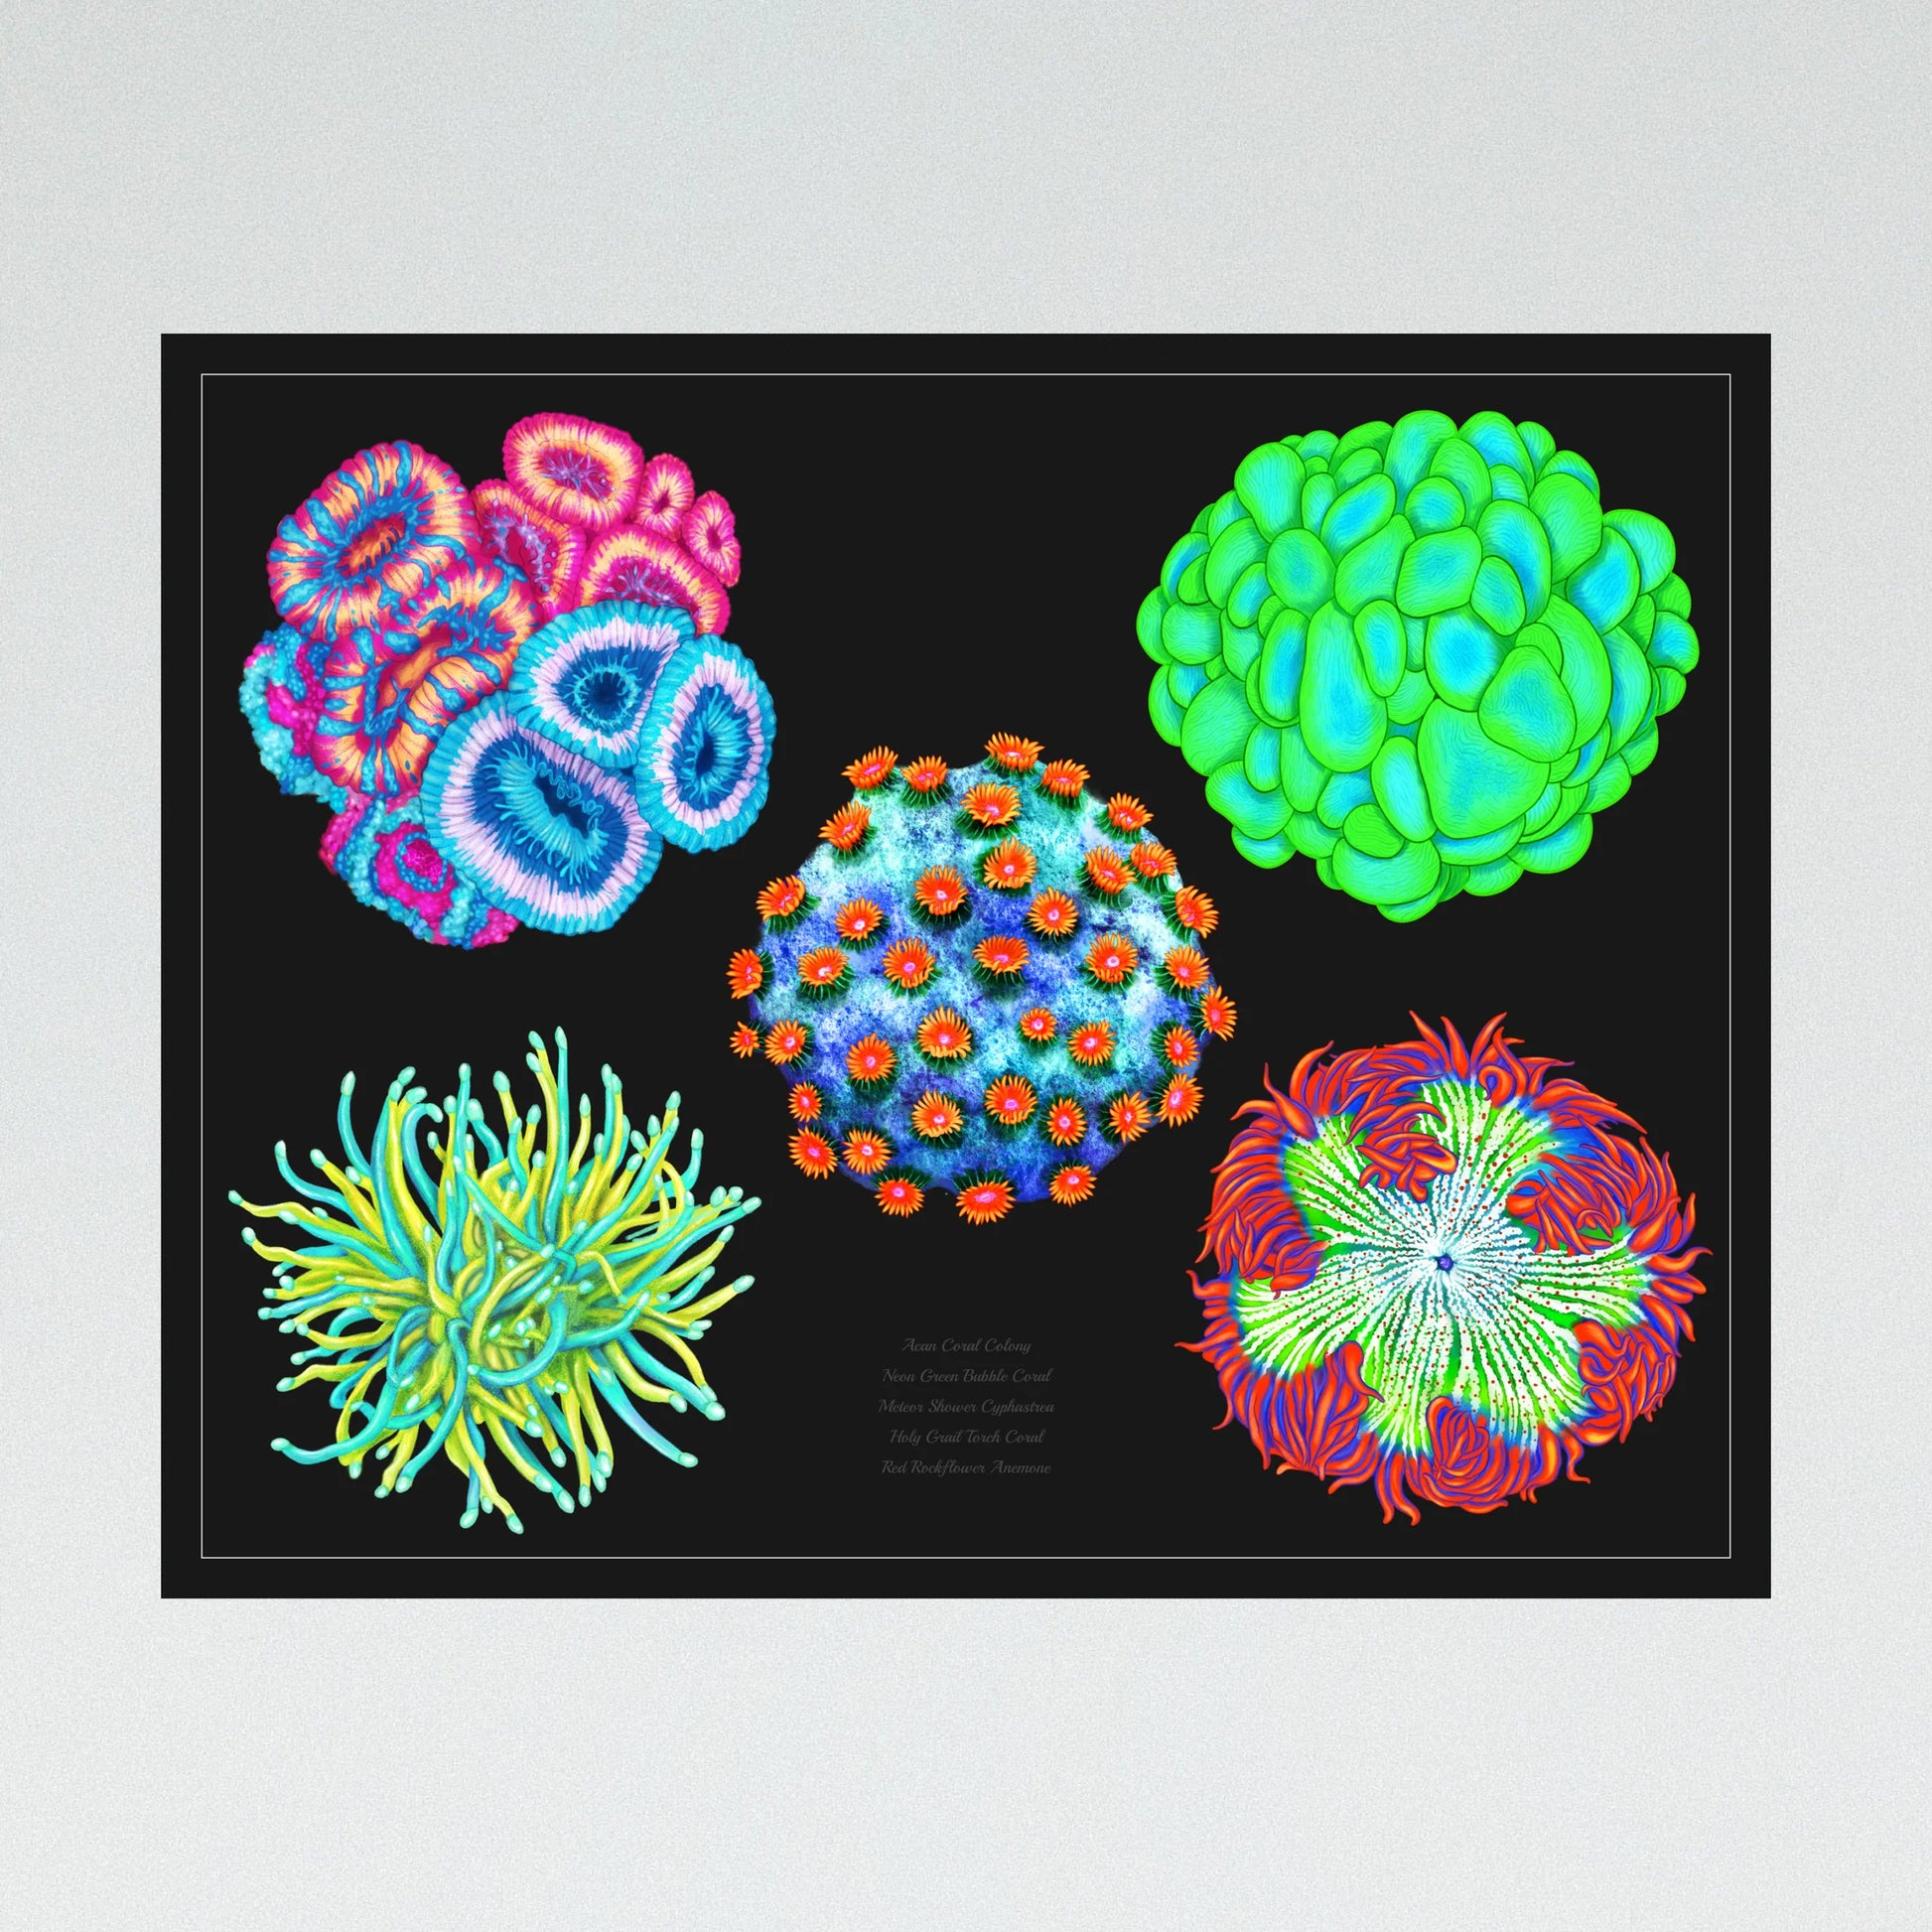 3 Posters Bundle with 15 Corals - Reef of Clowns